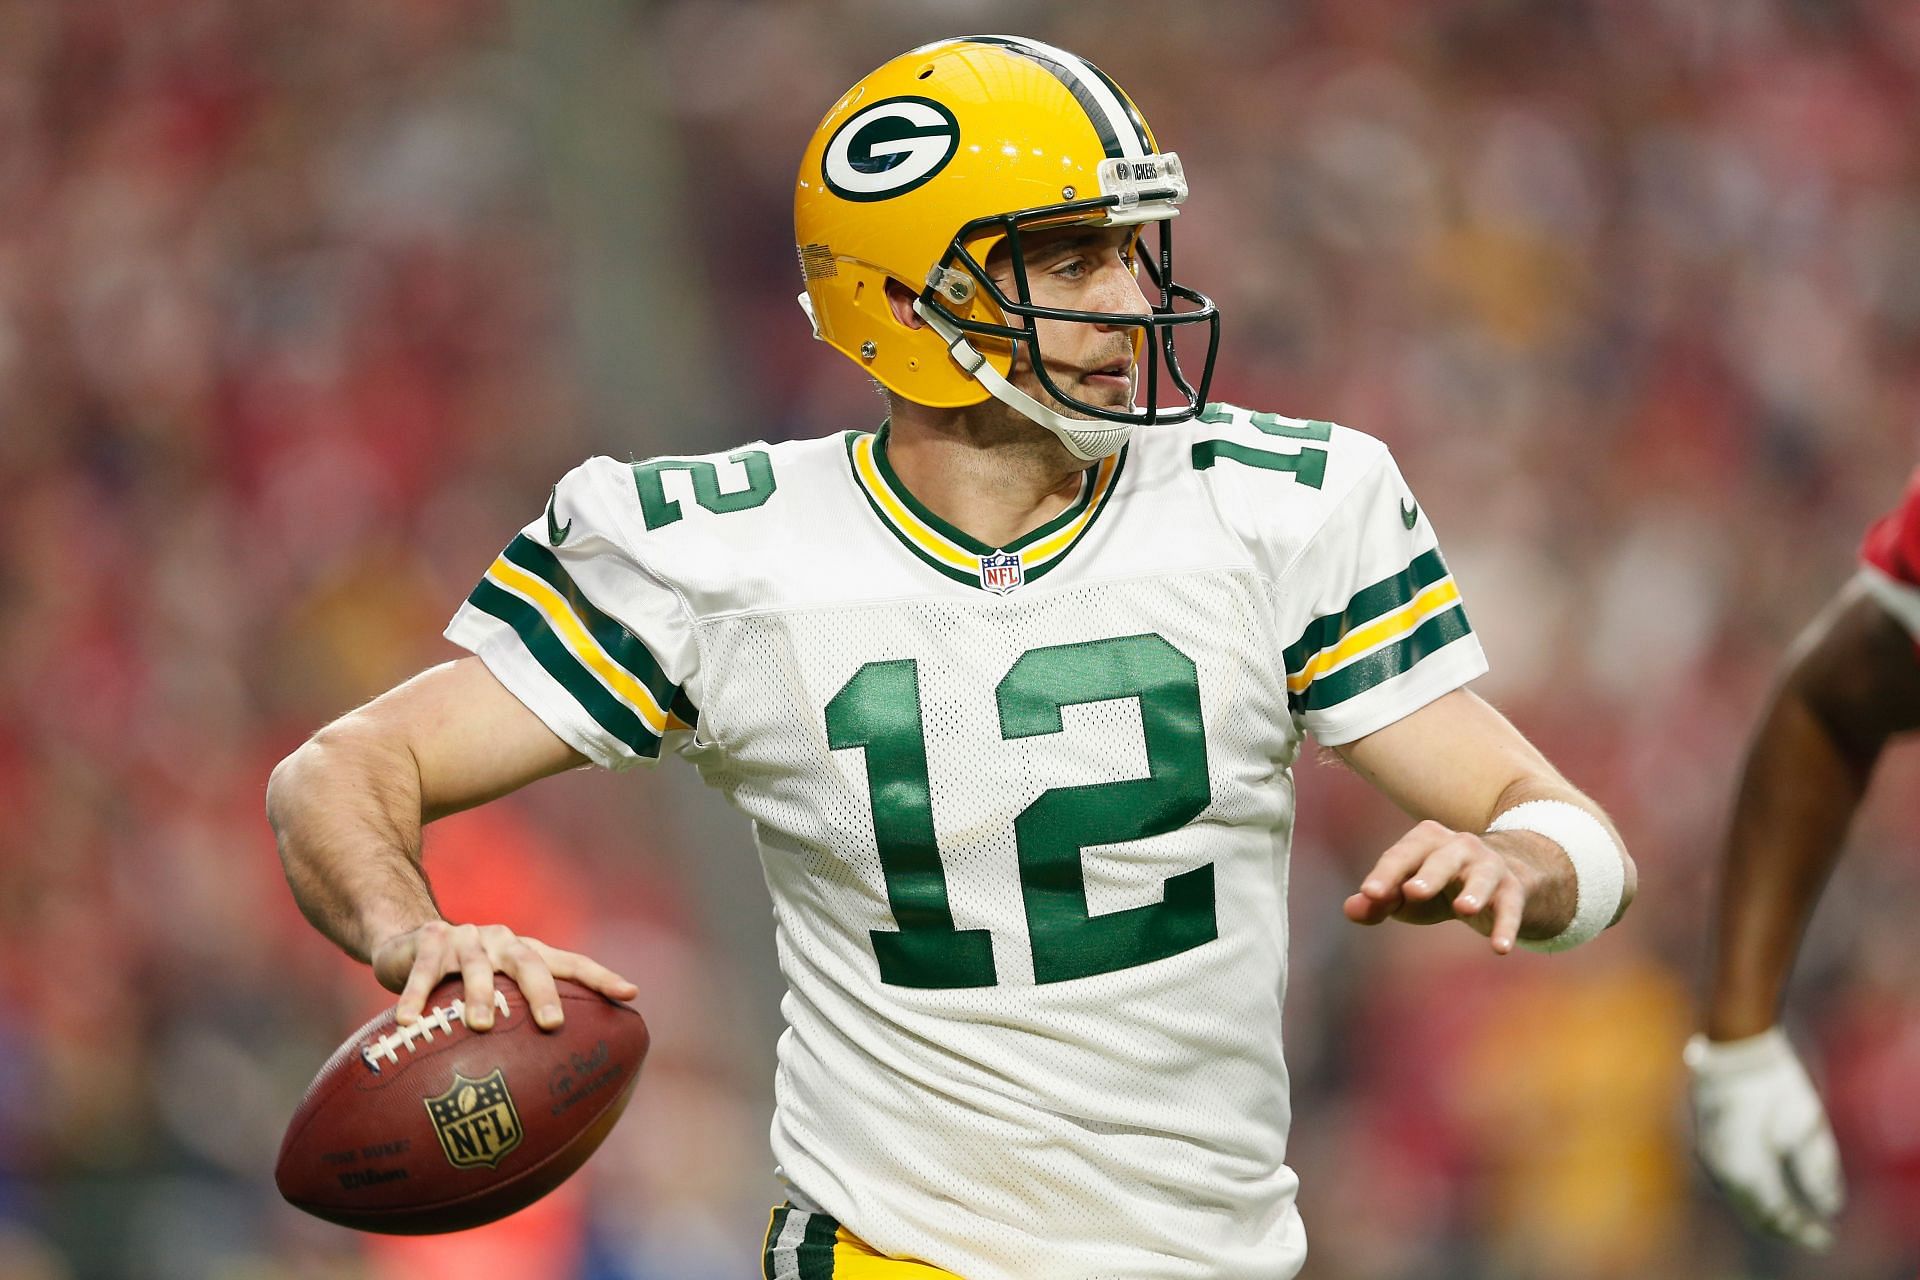 Rodgers still has several sponsorship deals in place after his tumultuous week (Photo: Getty)